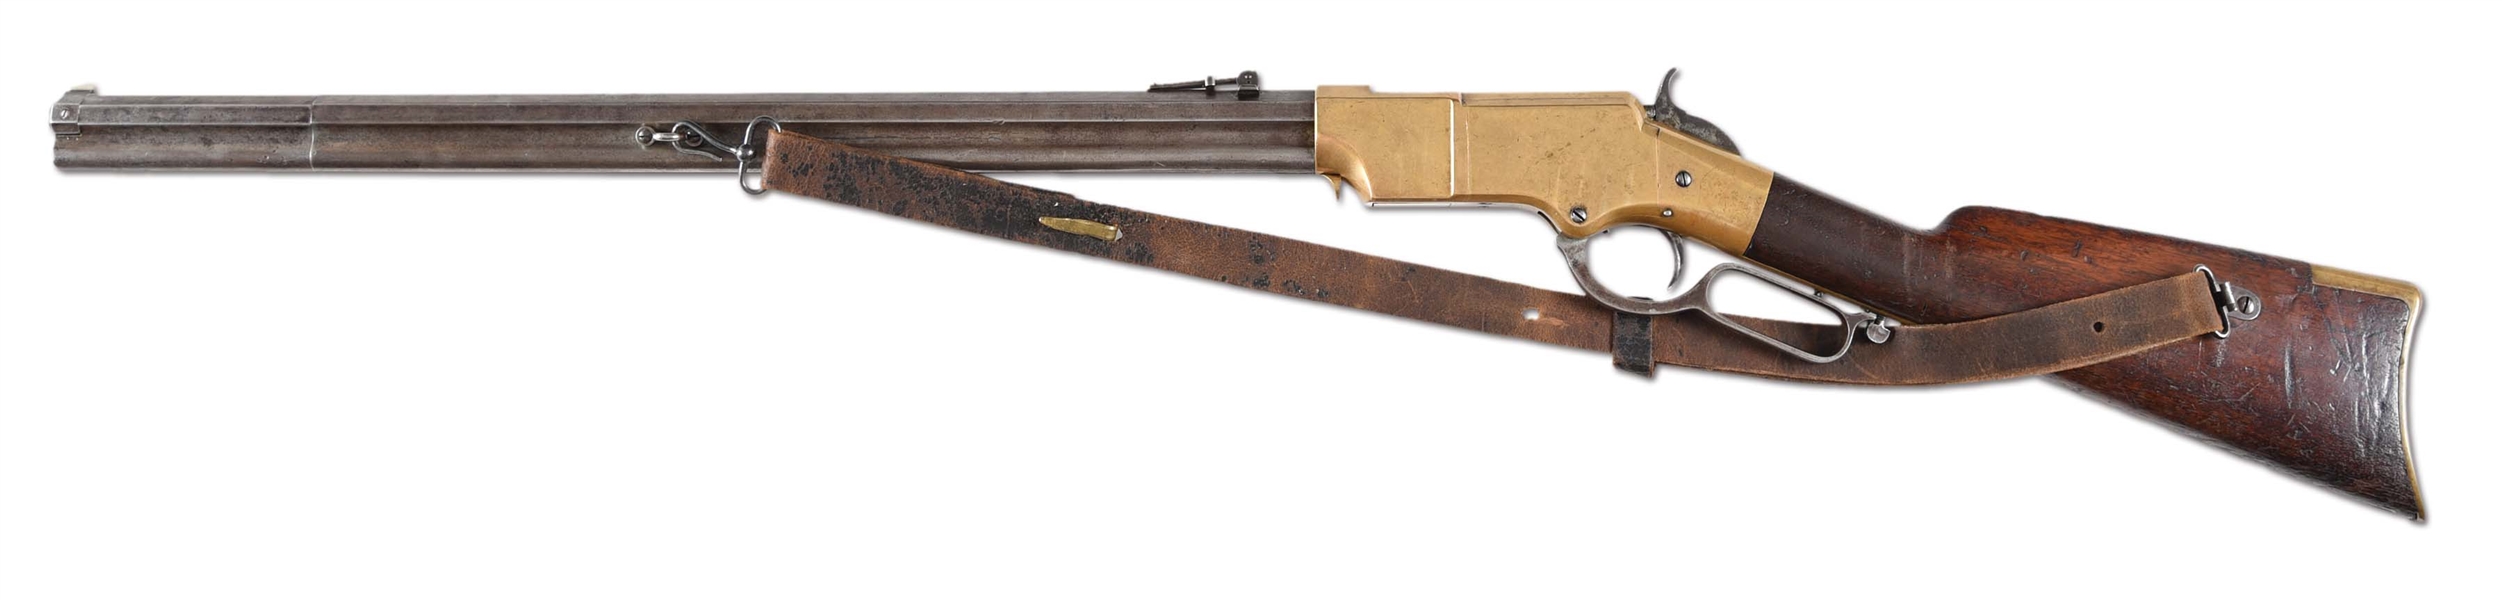 (A) NEW HAVEN ARMS CO. FIRST MODEL HENRY RIFLE.